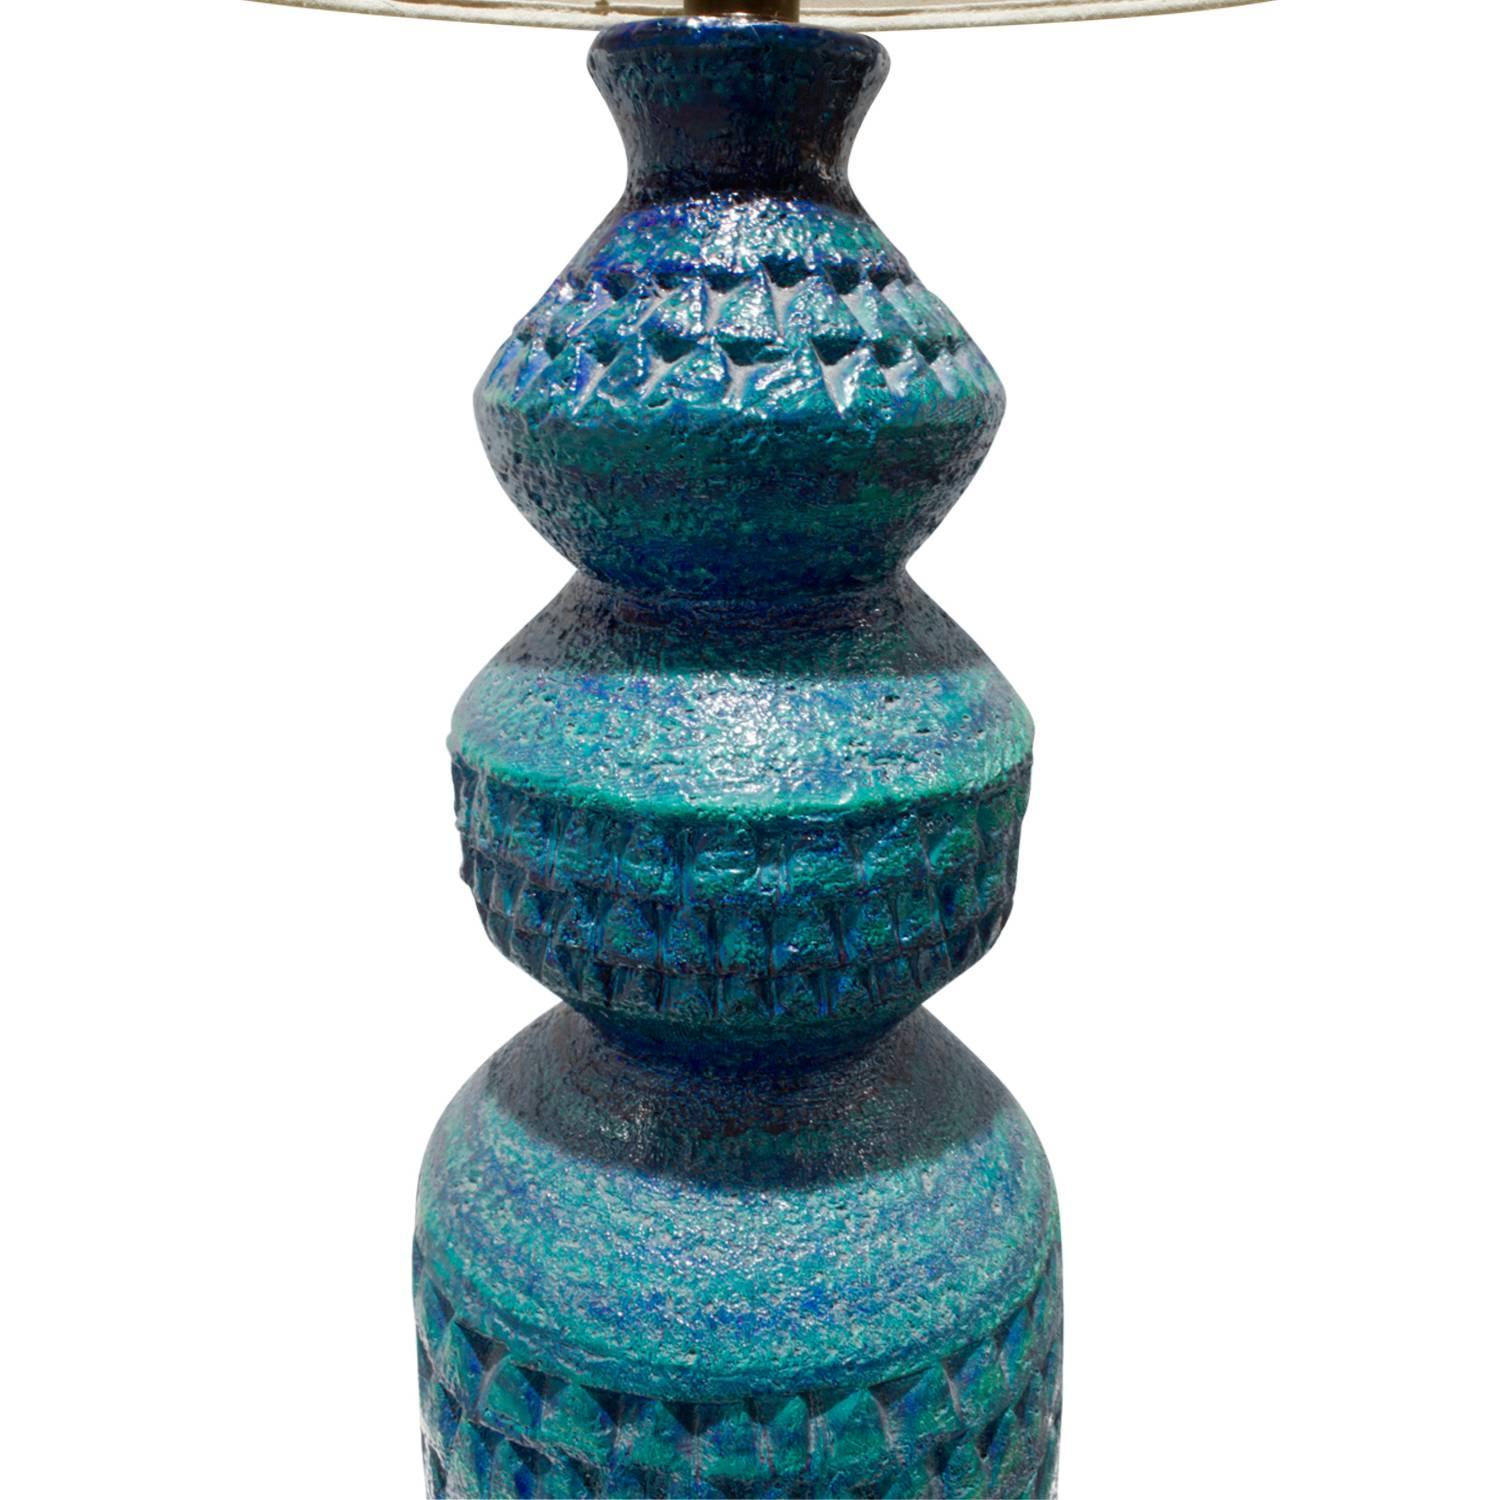 Large studio made heavily textured blue ceramic table lamp by Bitossi, Italy, 1950s.

Shade diameter: 18 inches.